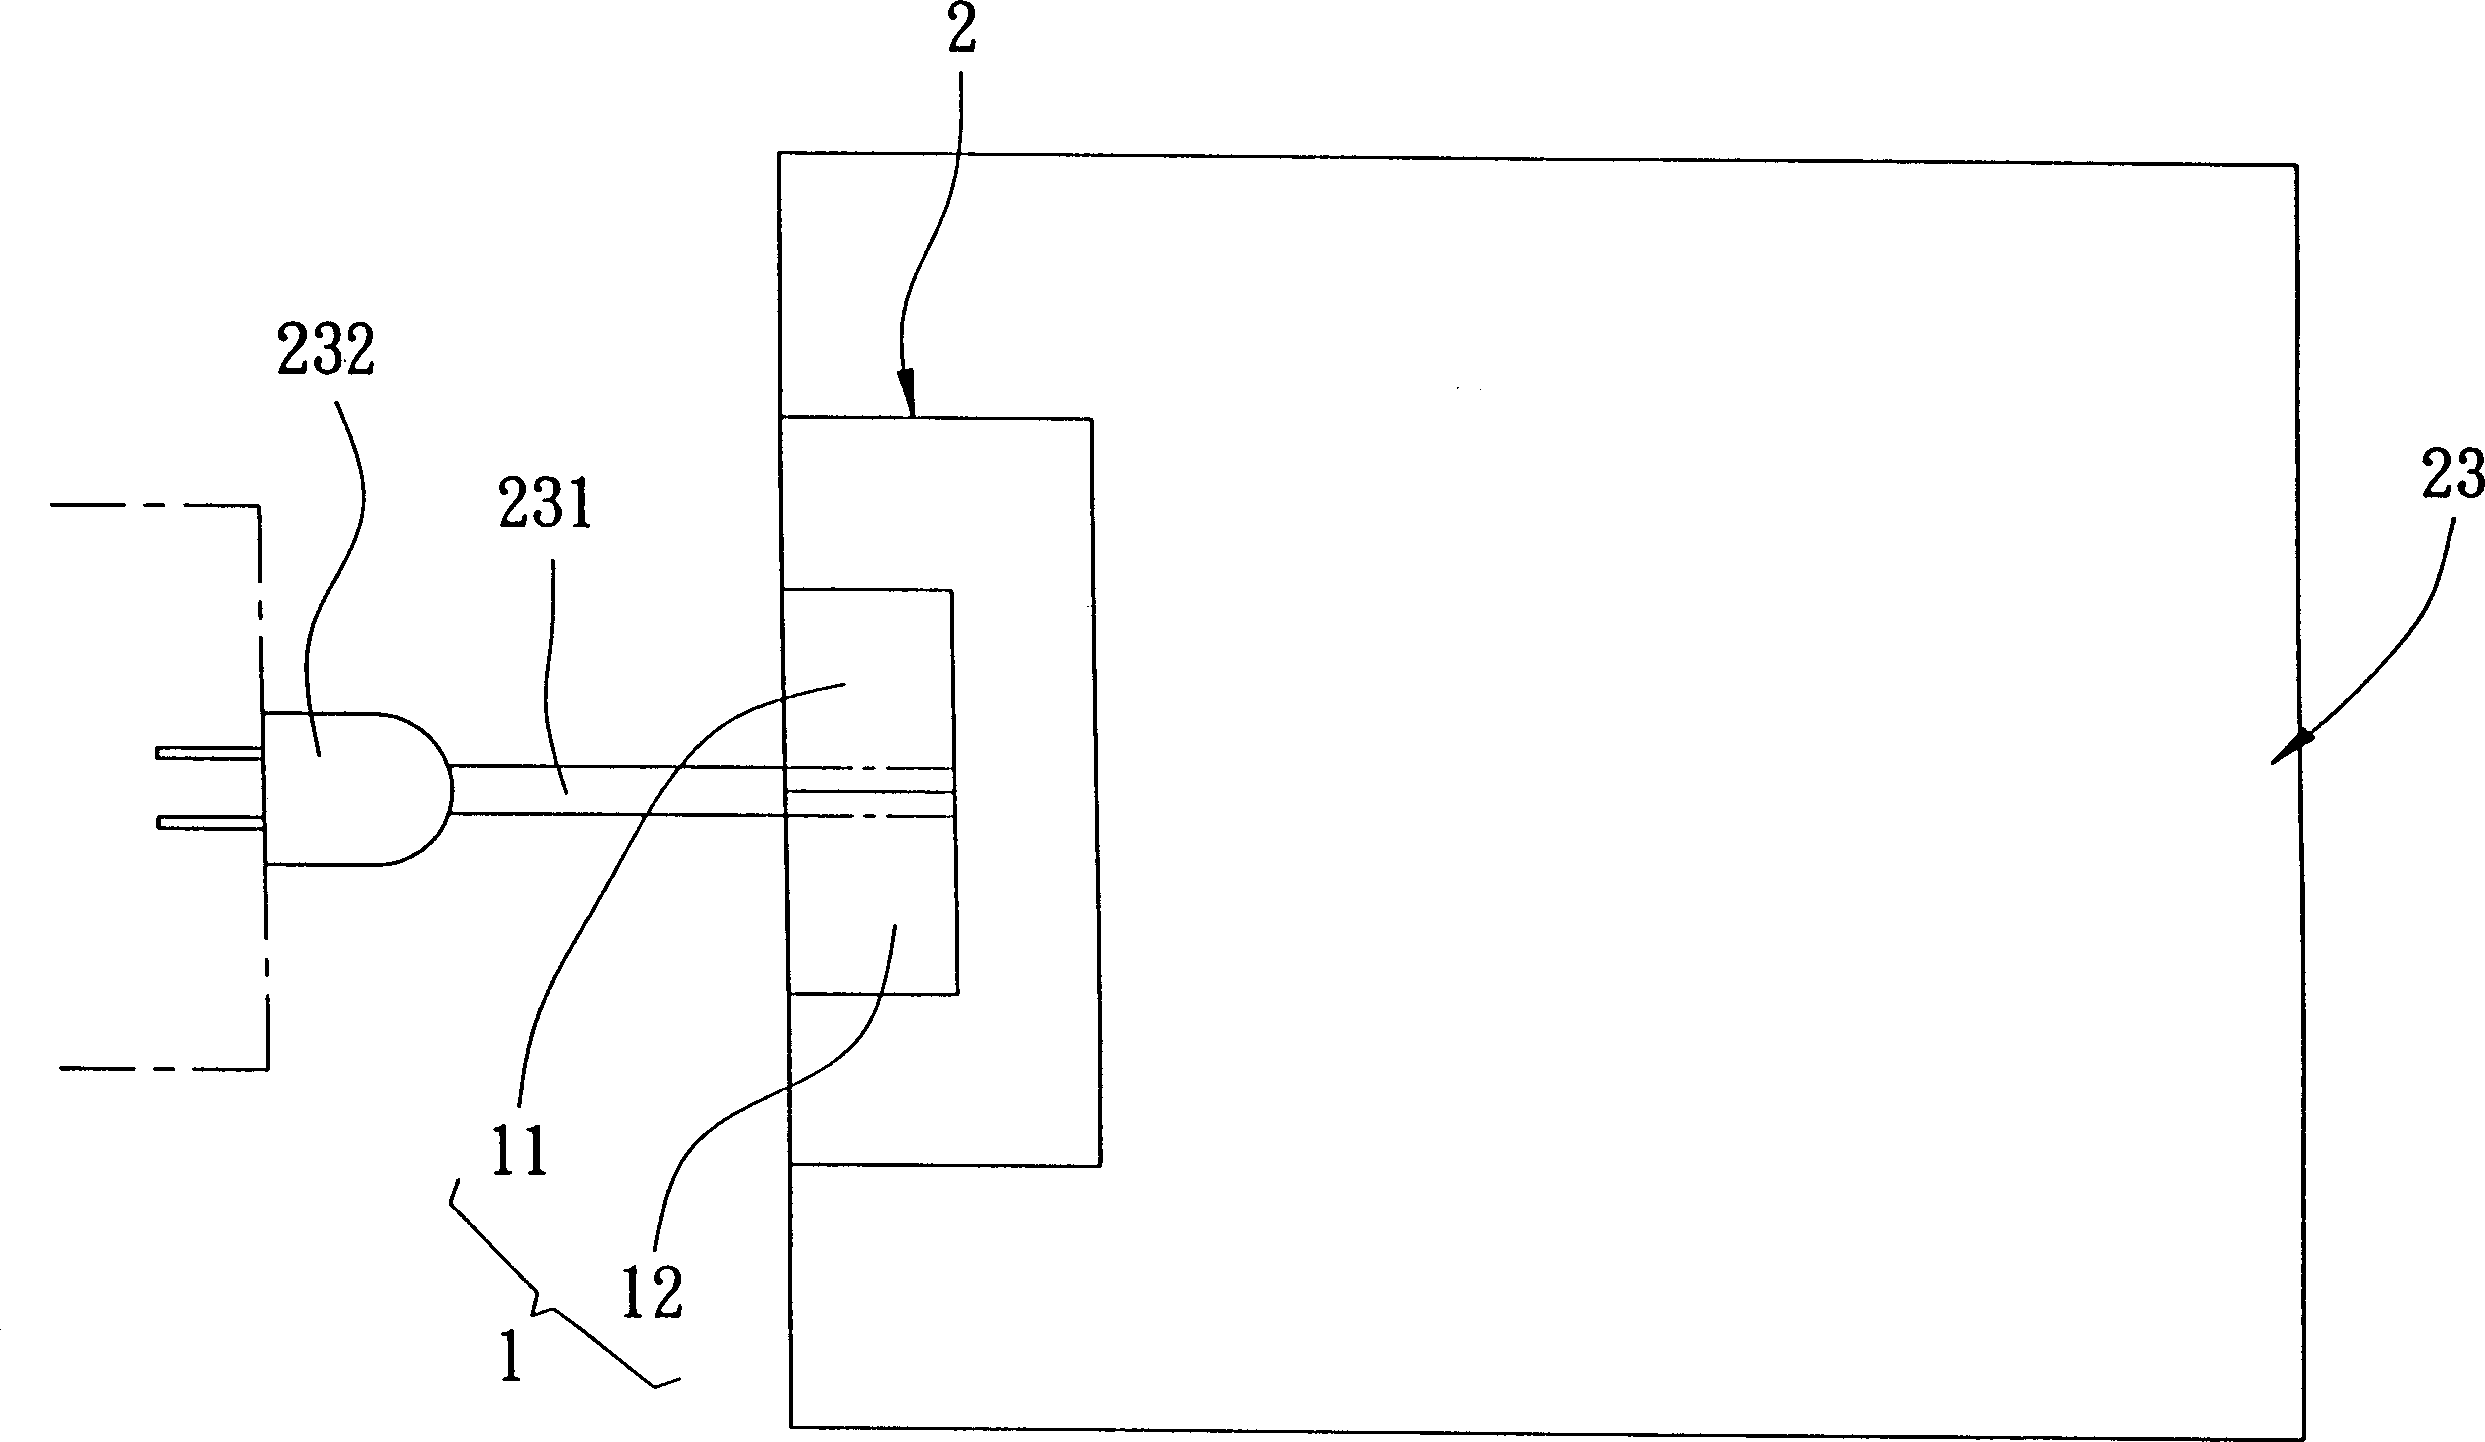 Device using magnetic field wave pattern as transmission signal